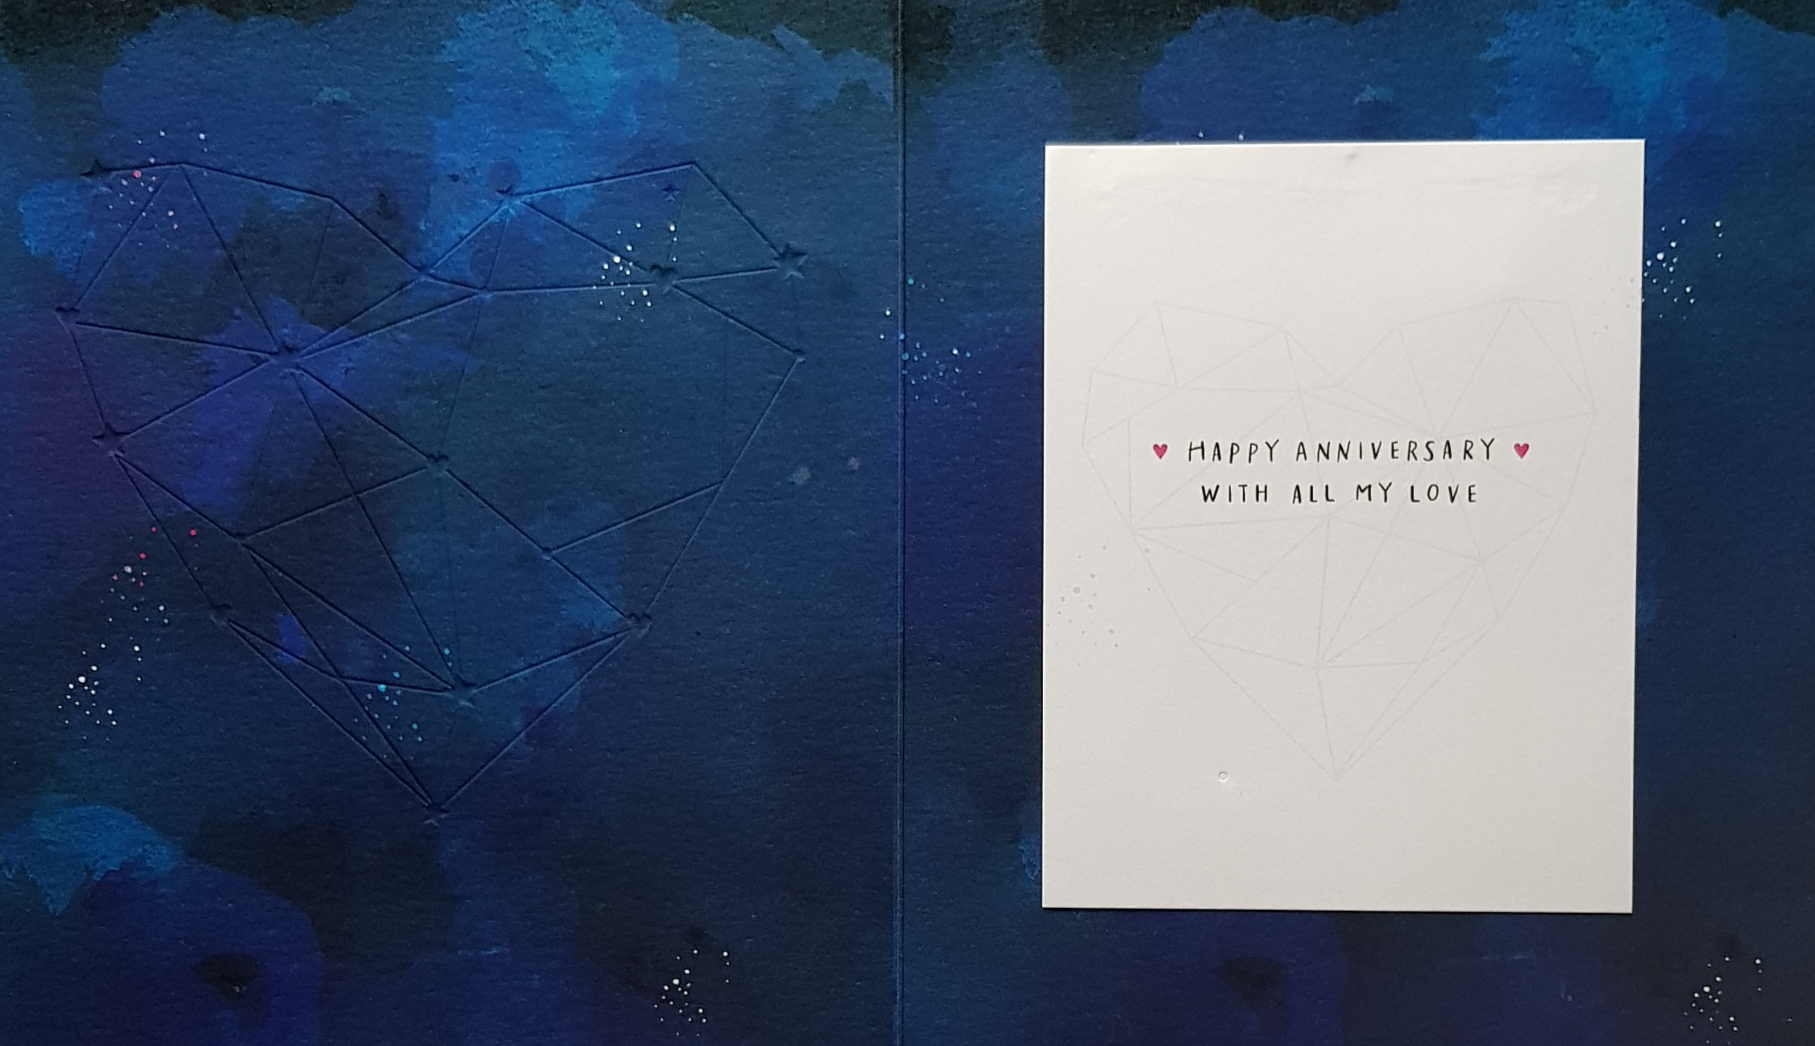 Anniversary Card - Wife / Heart-Shaped Star Constellation On Blue Background